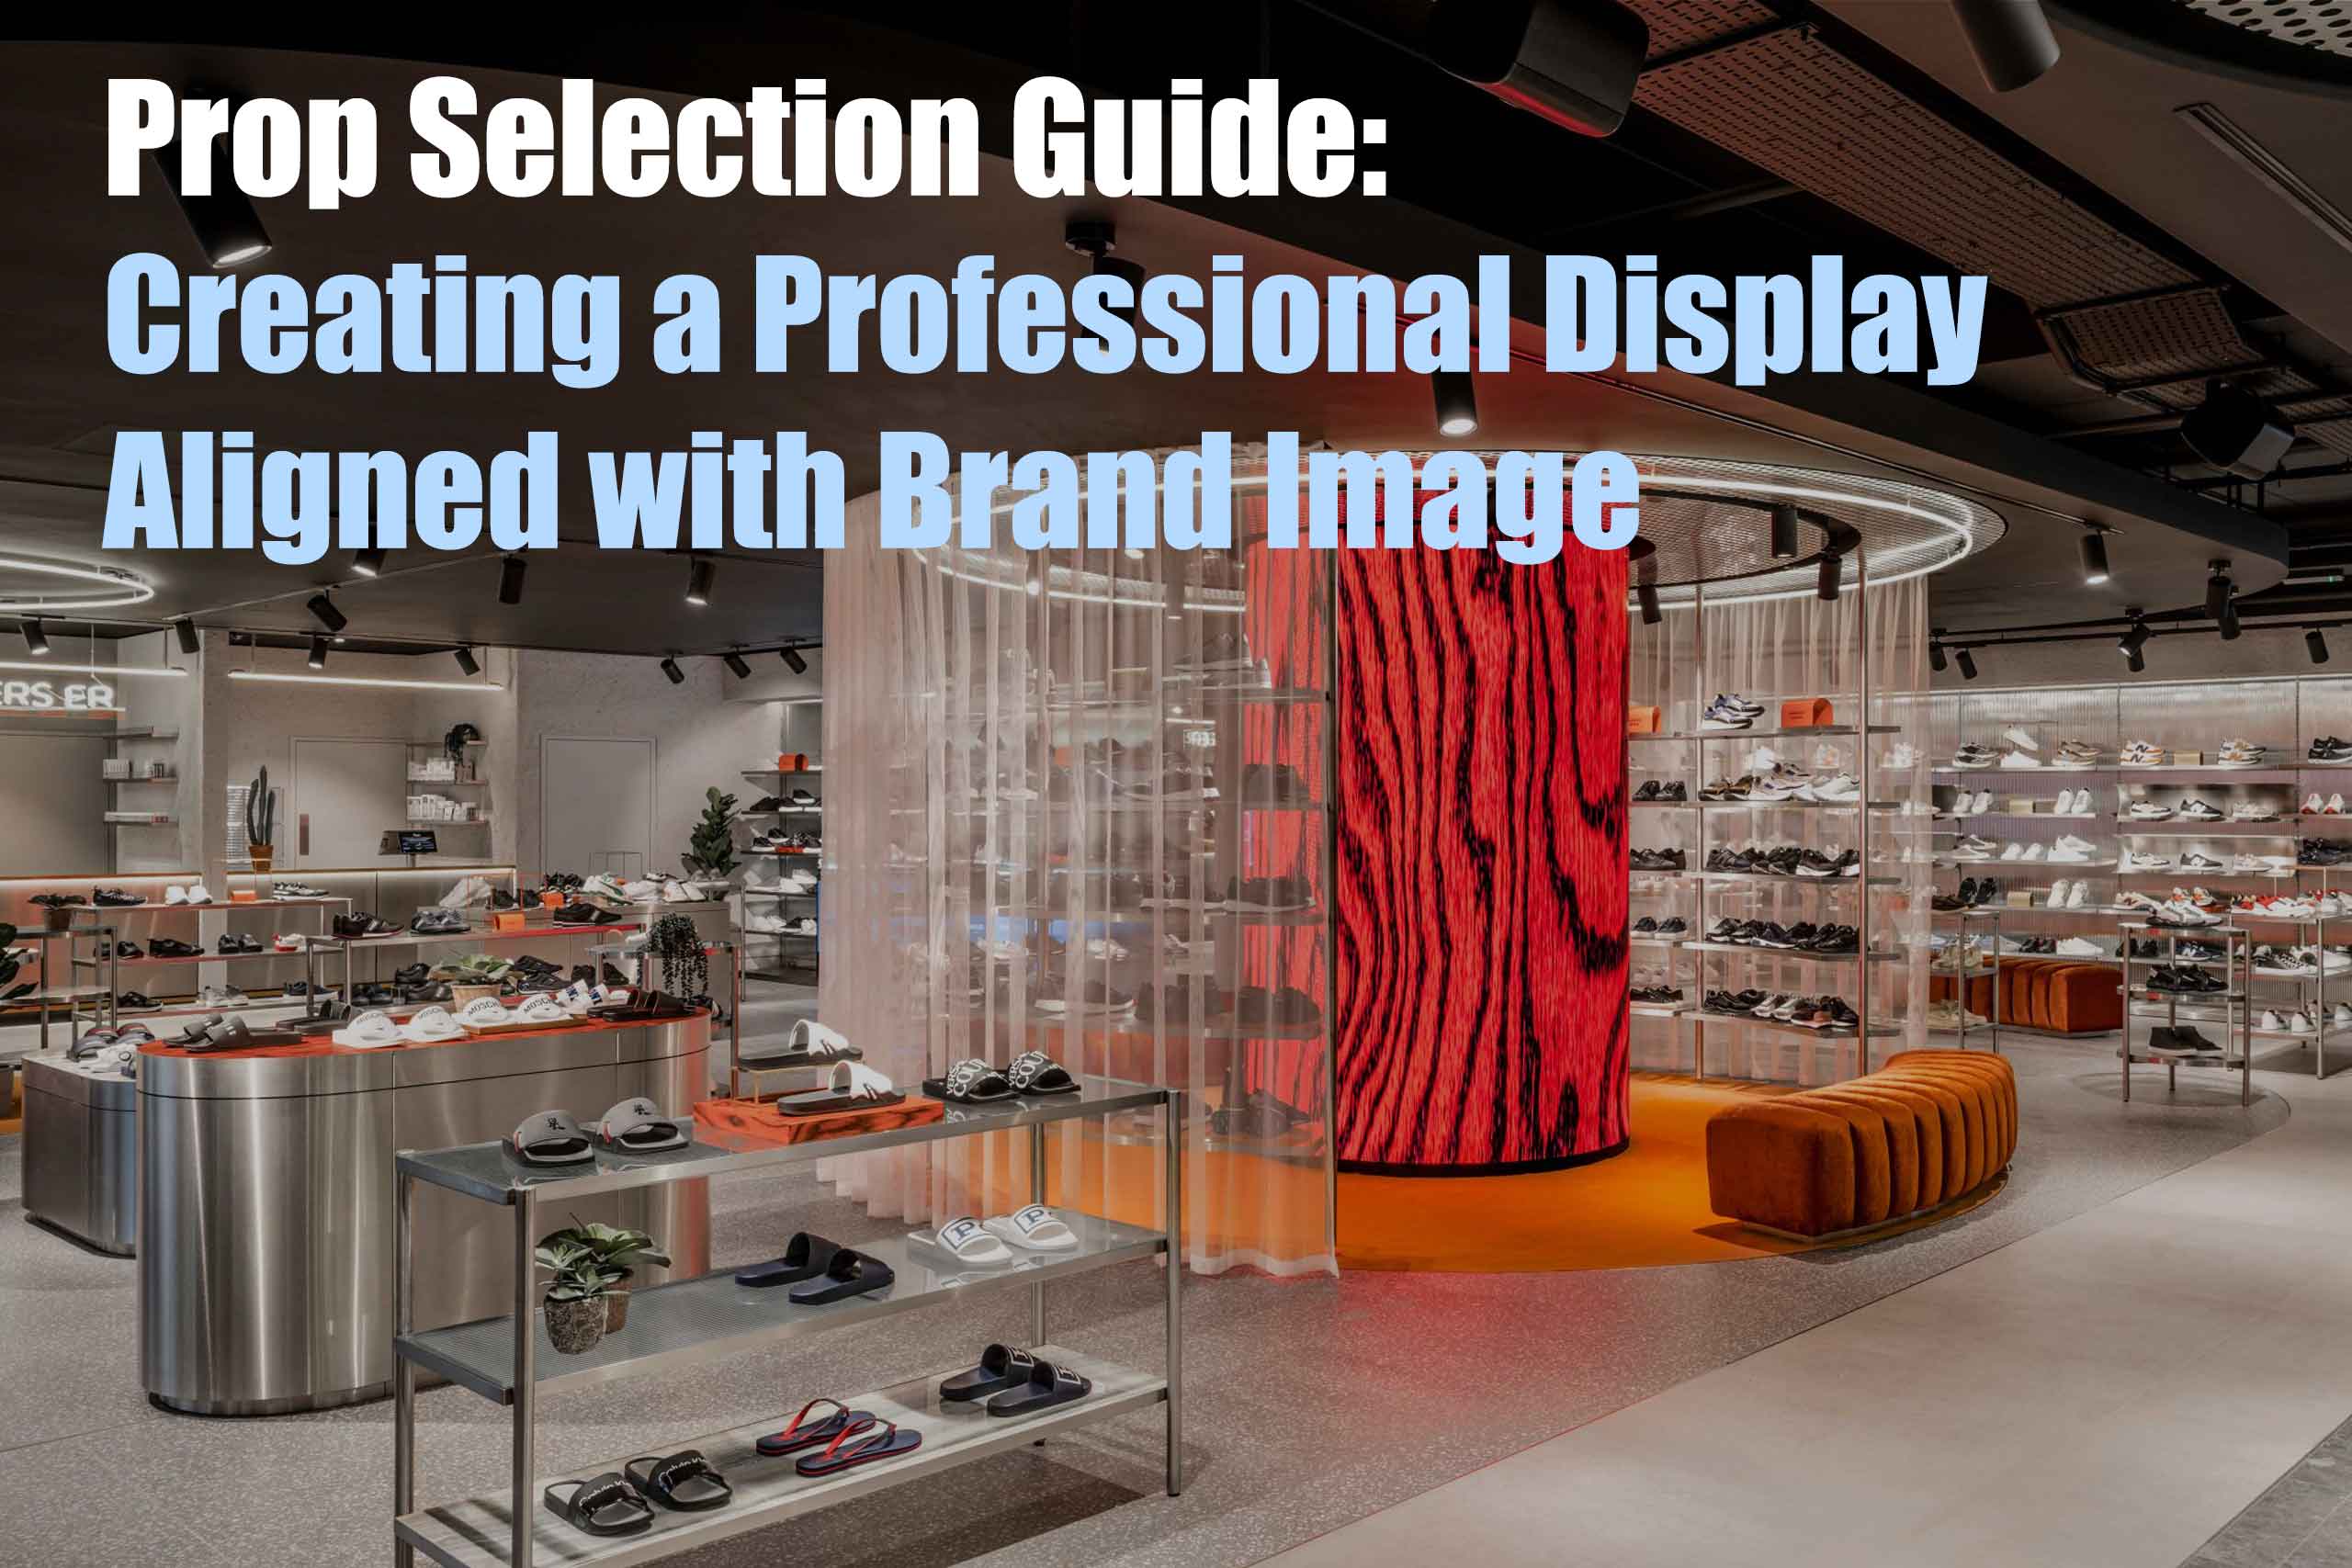 Prop Selection Guide Creating a Professional Display Aligned with Brand Image